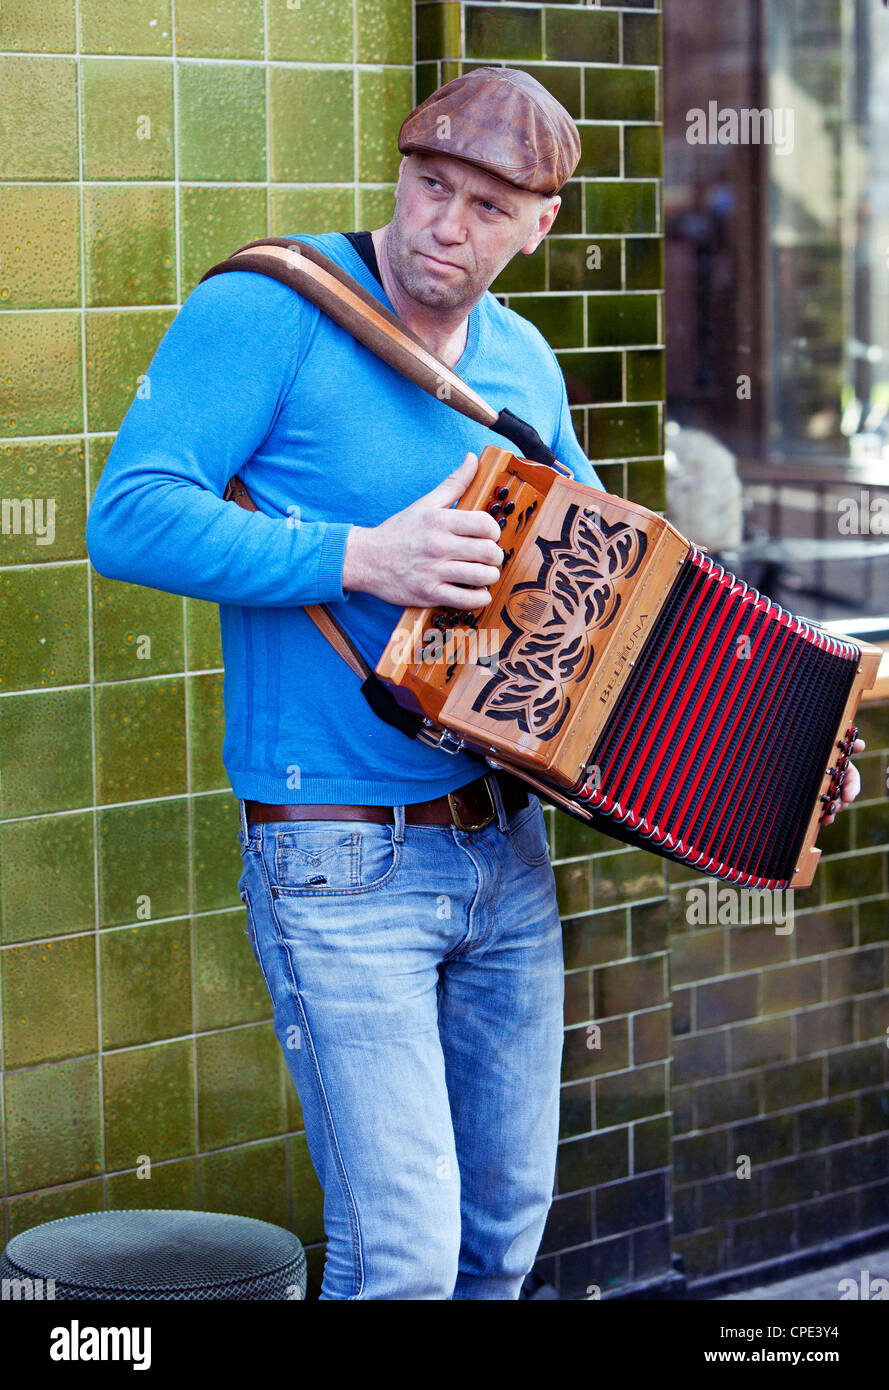 Portrait of a busker playing an accordion, Columbia Road Flower Market, London, England, UK Stock Photo